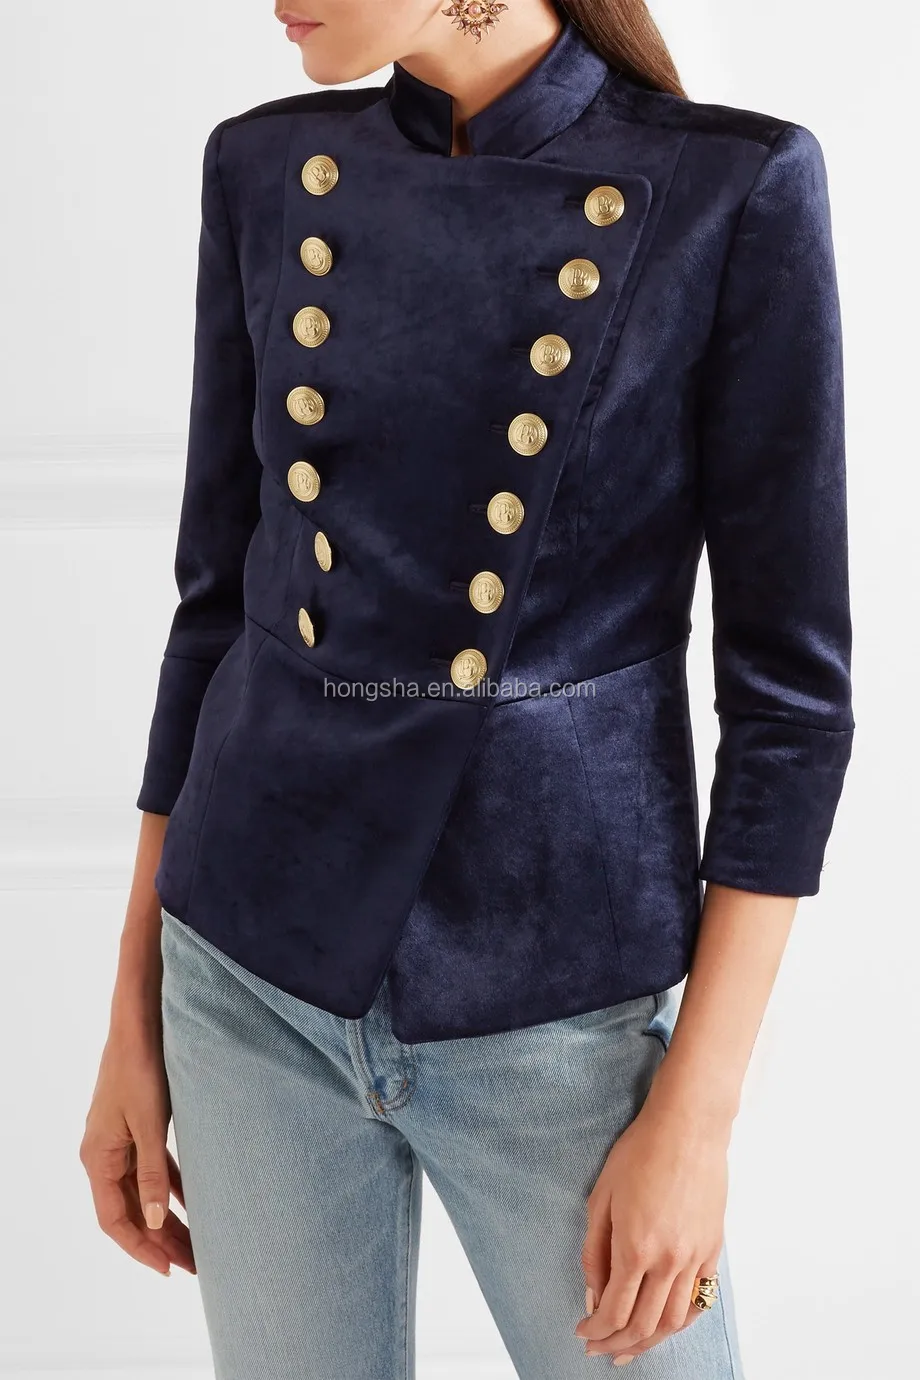 Online Buy Wholesale double breasted blazer from China